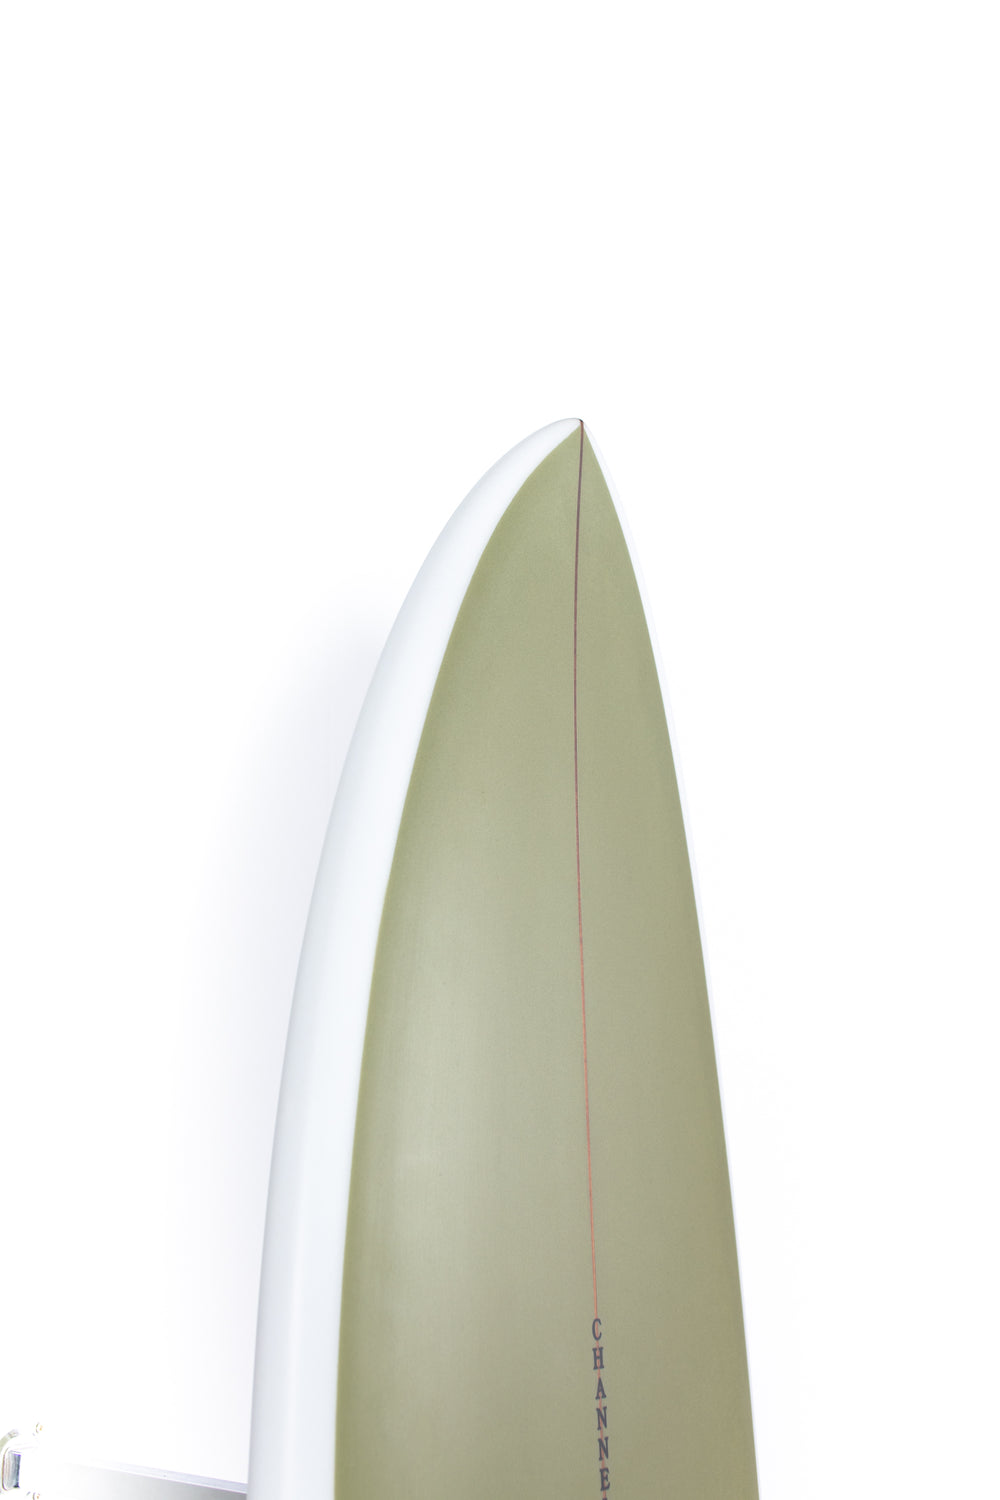 Channel Islands | CI MID TWIN | Buy at PUKAS SURF SHOP